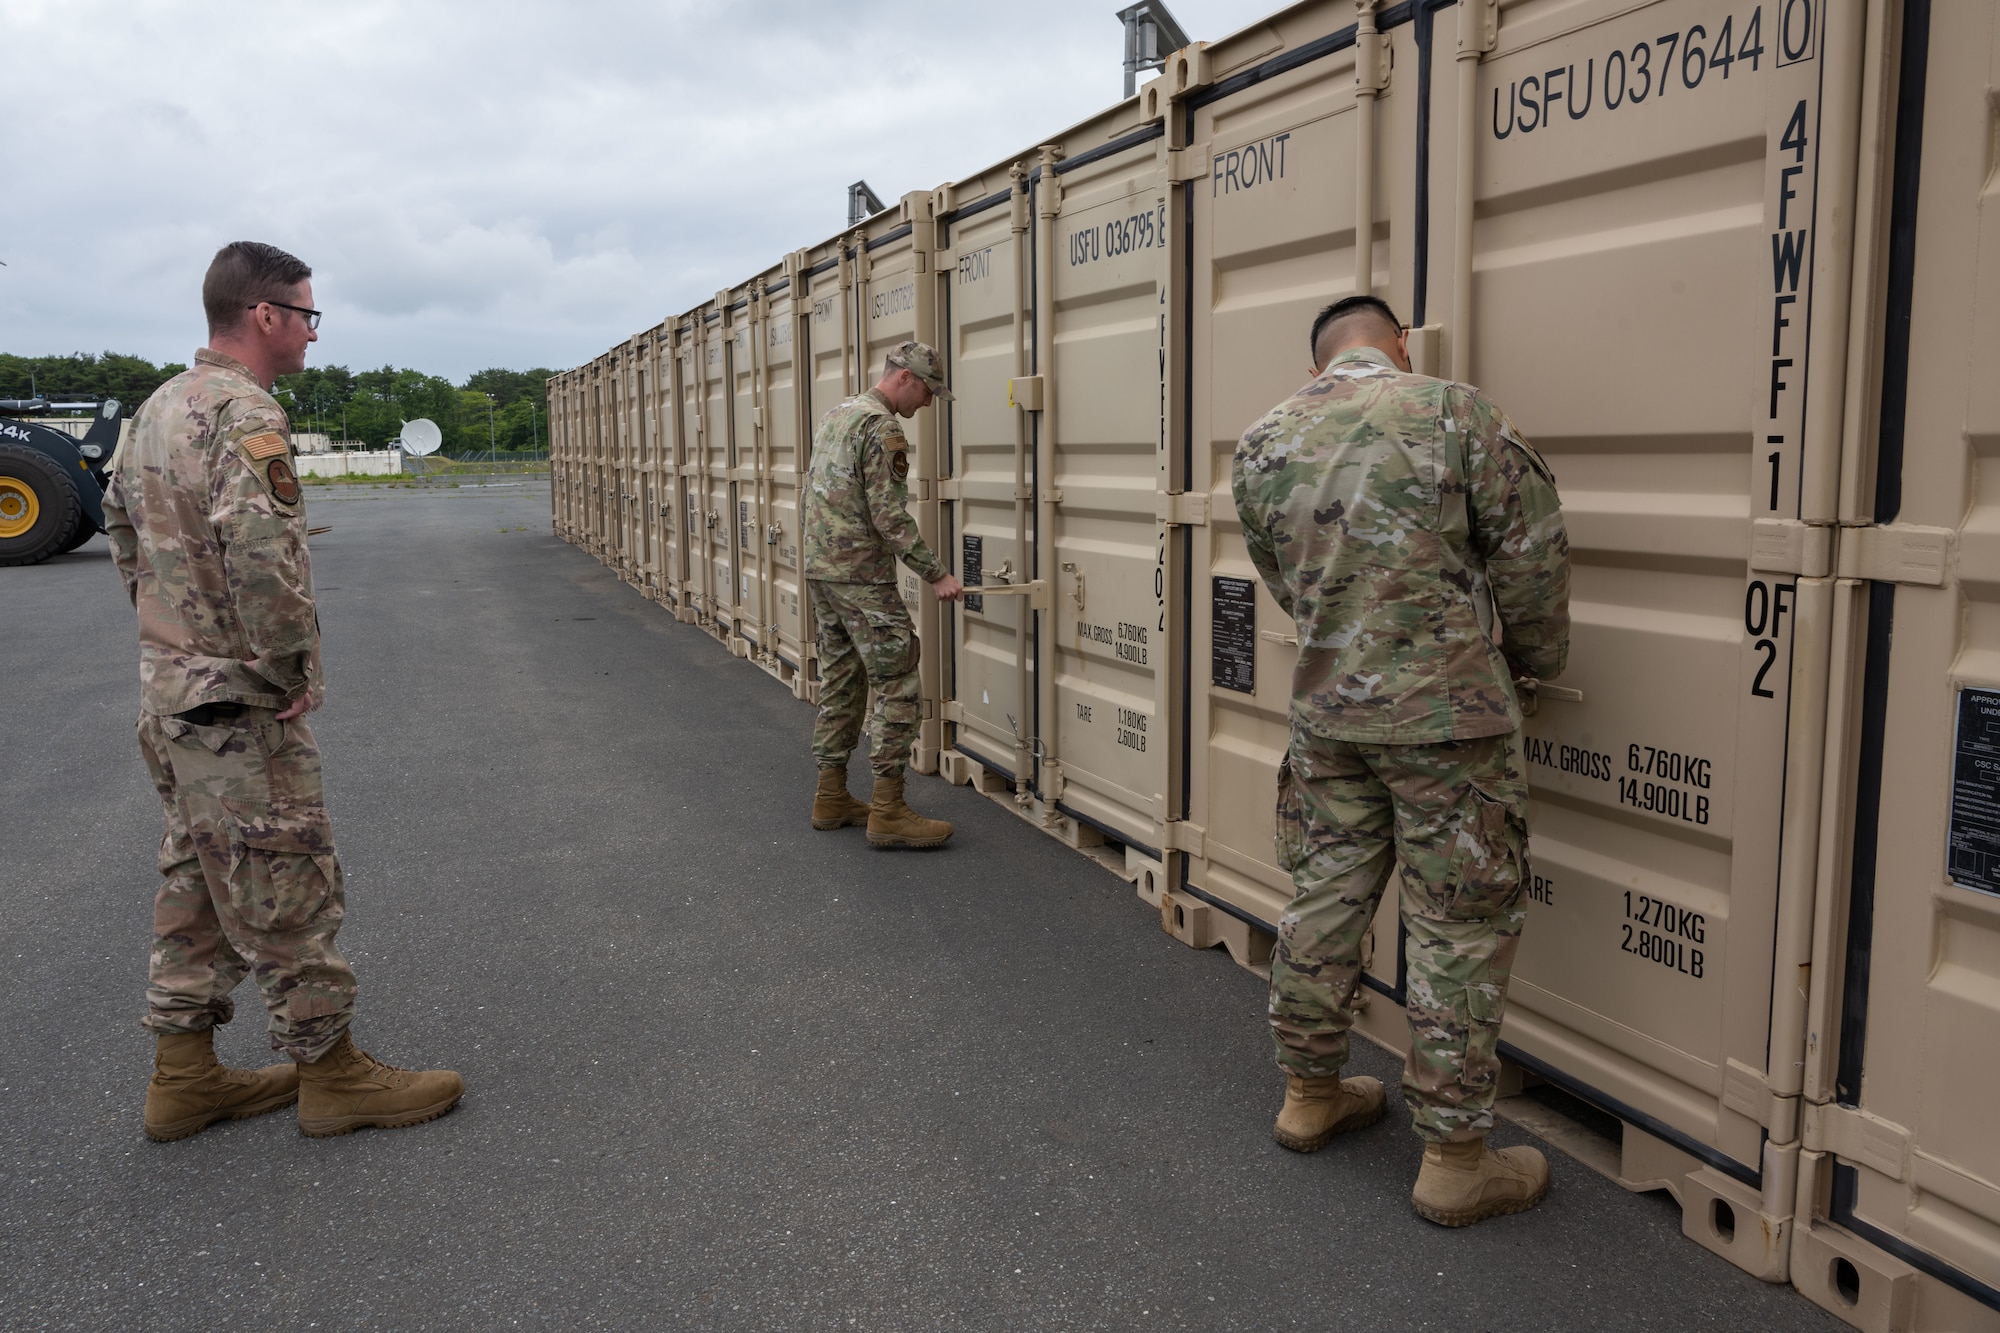 U.S. Airmen assigned to the 35th Civil Engineer Squadron water and fuel system open the Water and Fuel Expedient Repair System (WaFERS) containers for an inventory check prior to the annual Prime Base Engineer Emergency Force (Prime BEEF) at Misawa Air Base, Japan, June 13, 2022.